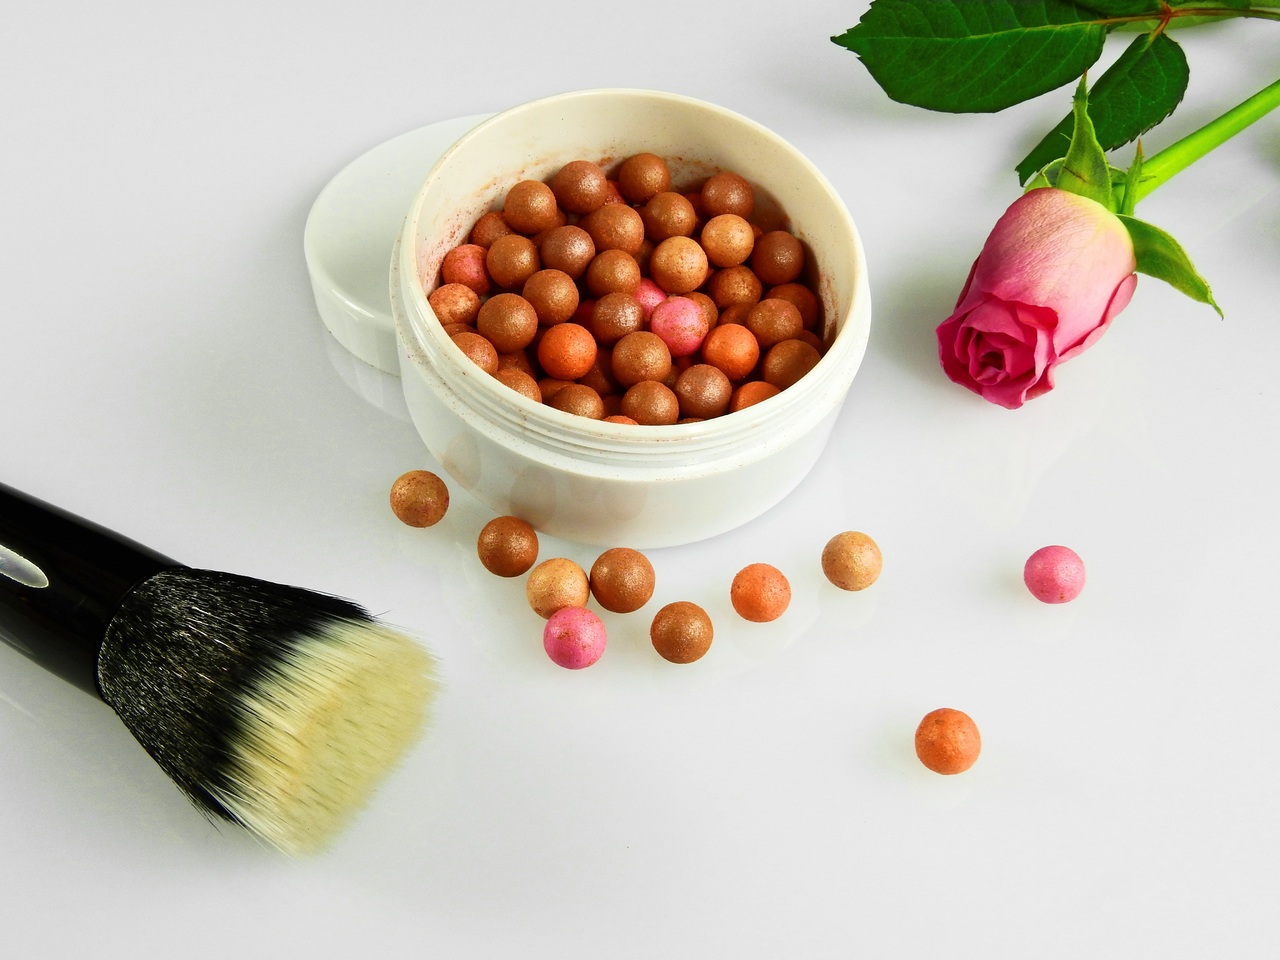 There are diversified makeup kits available in the market. Among them, bronzing pearls are much famous